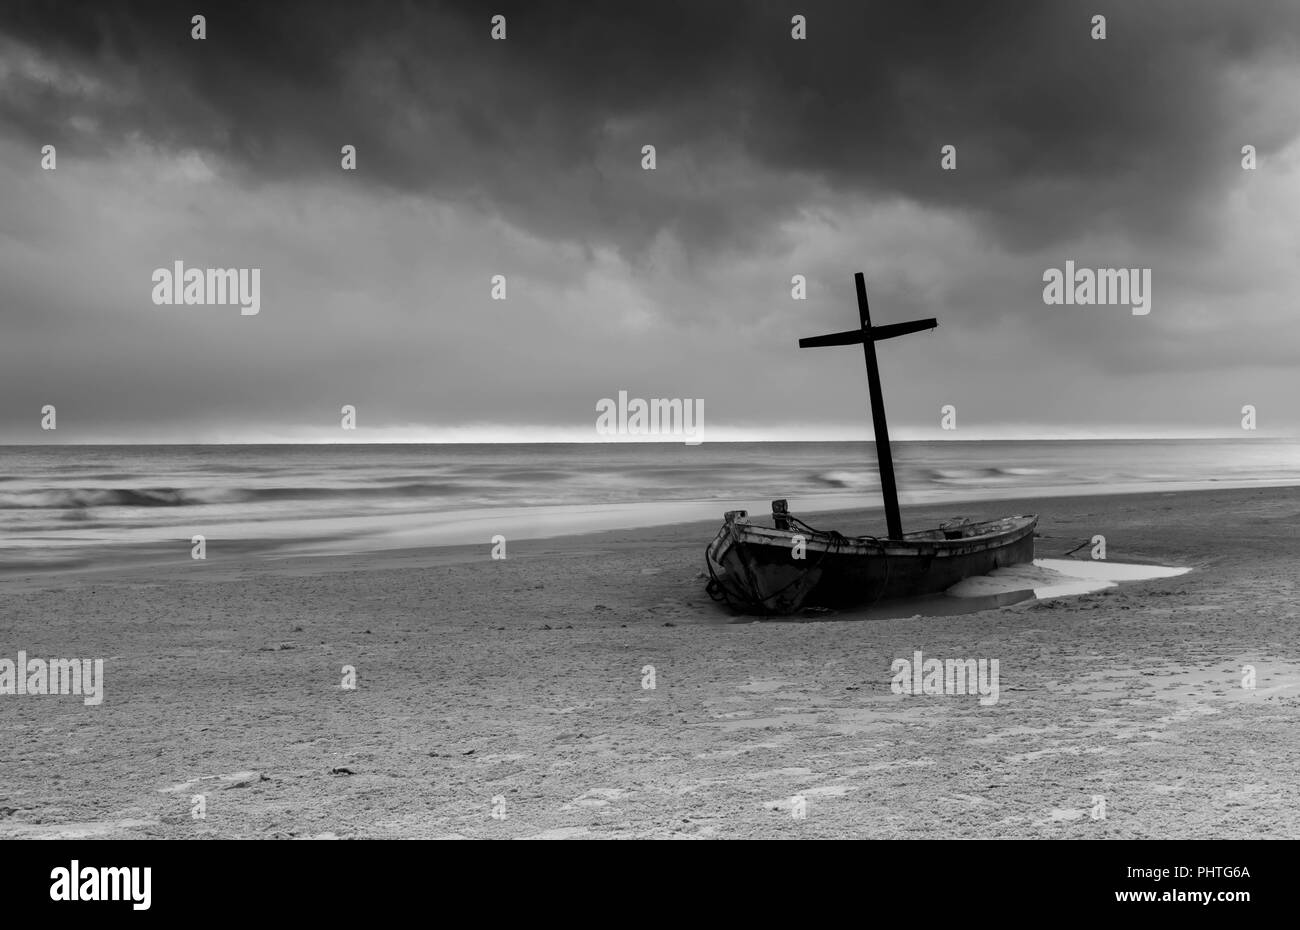 Wereck boat on the beach with storm cloud  Stock Photo